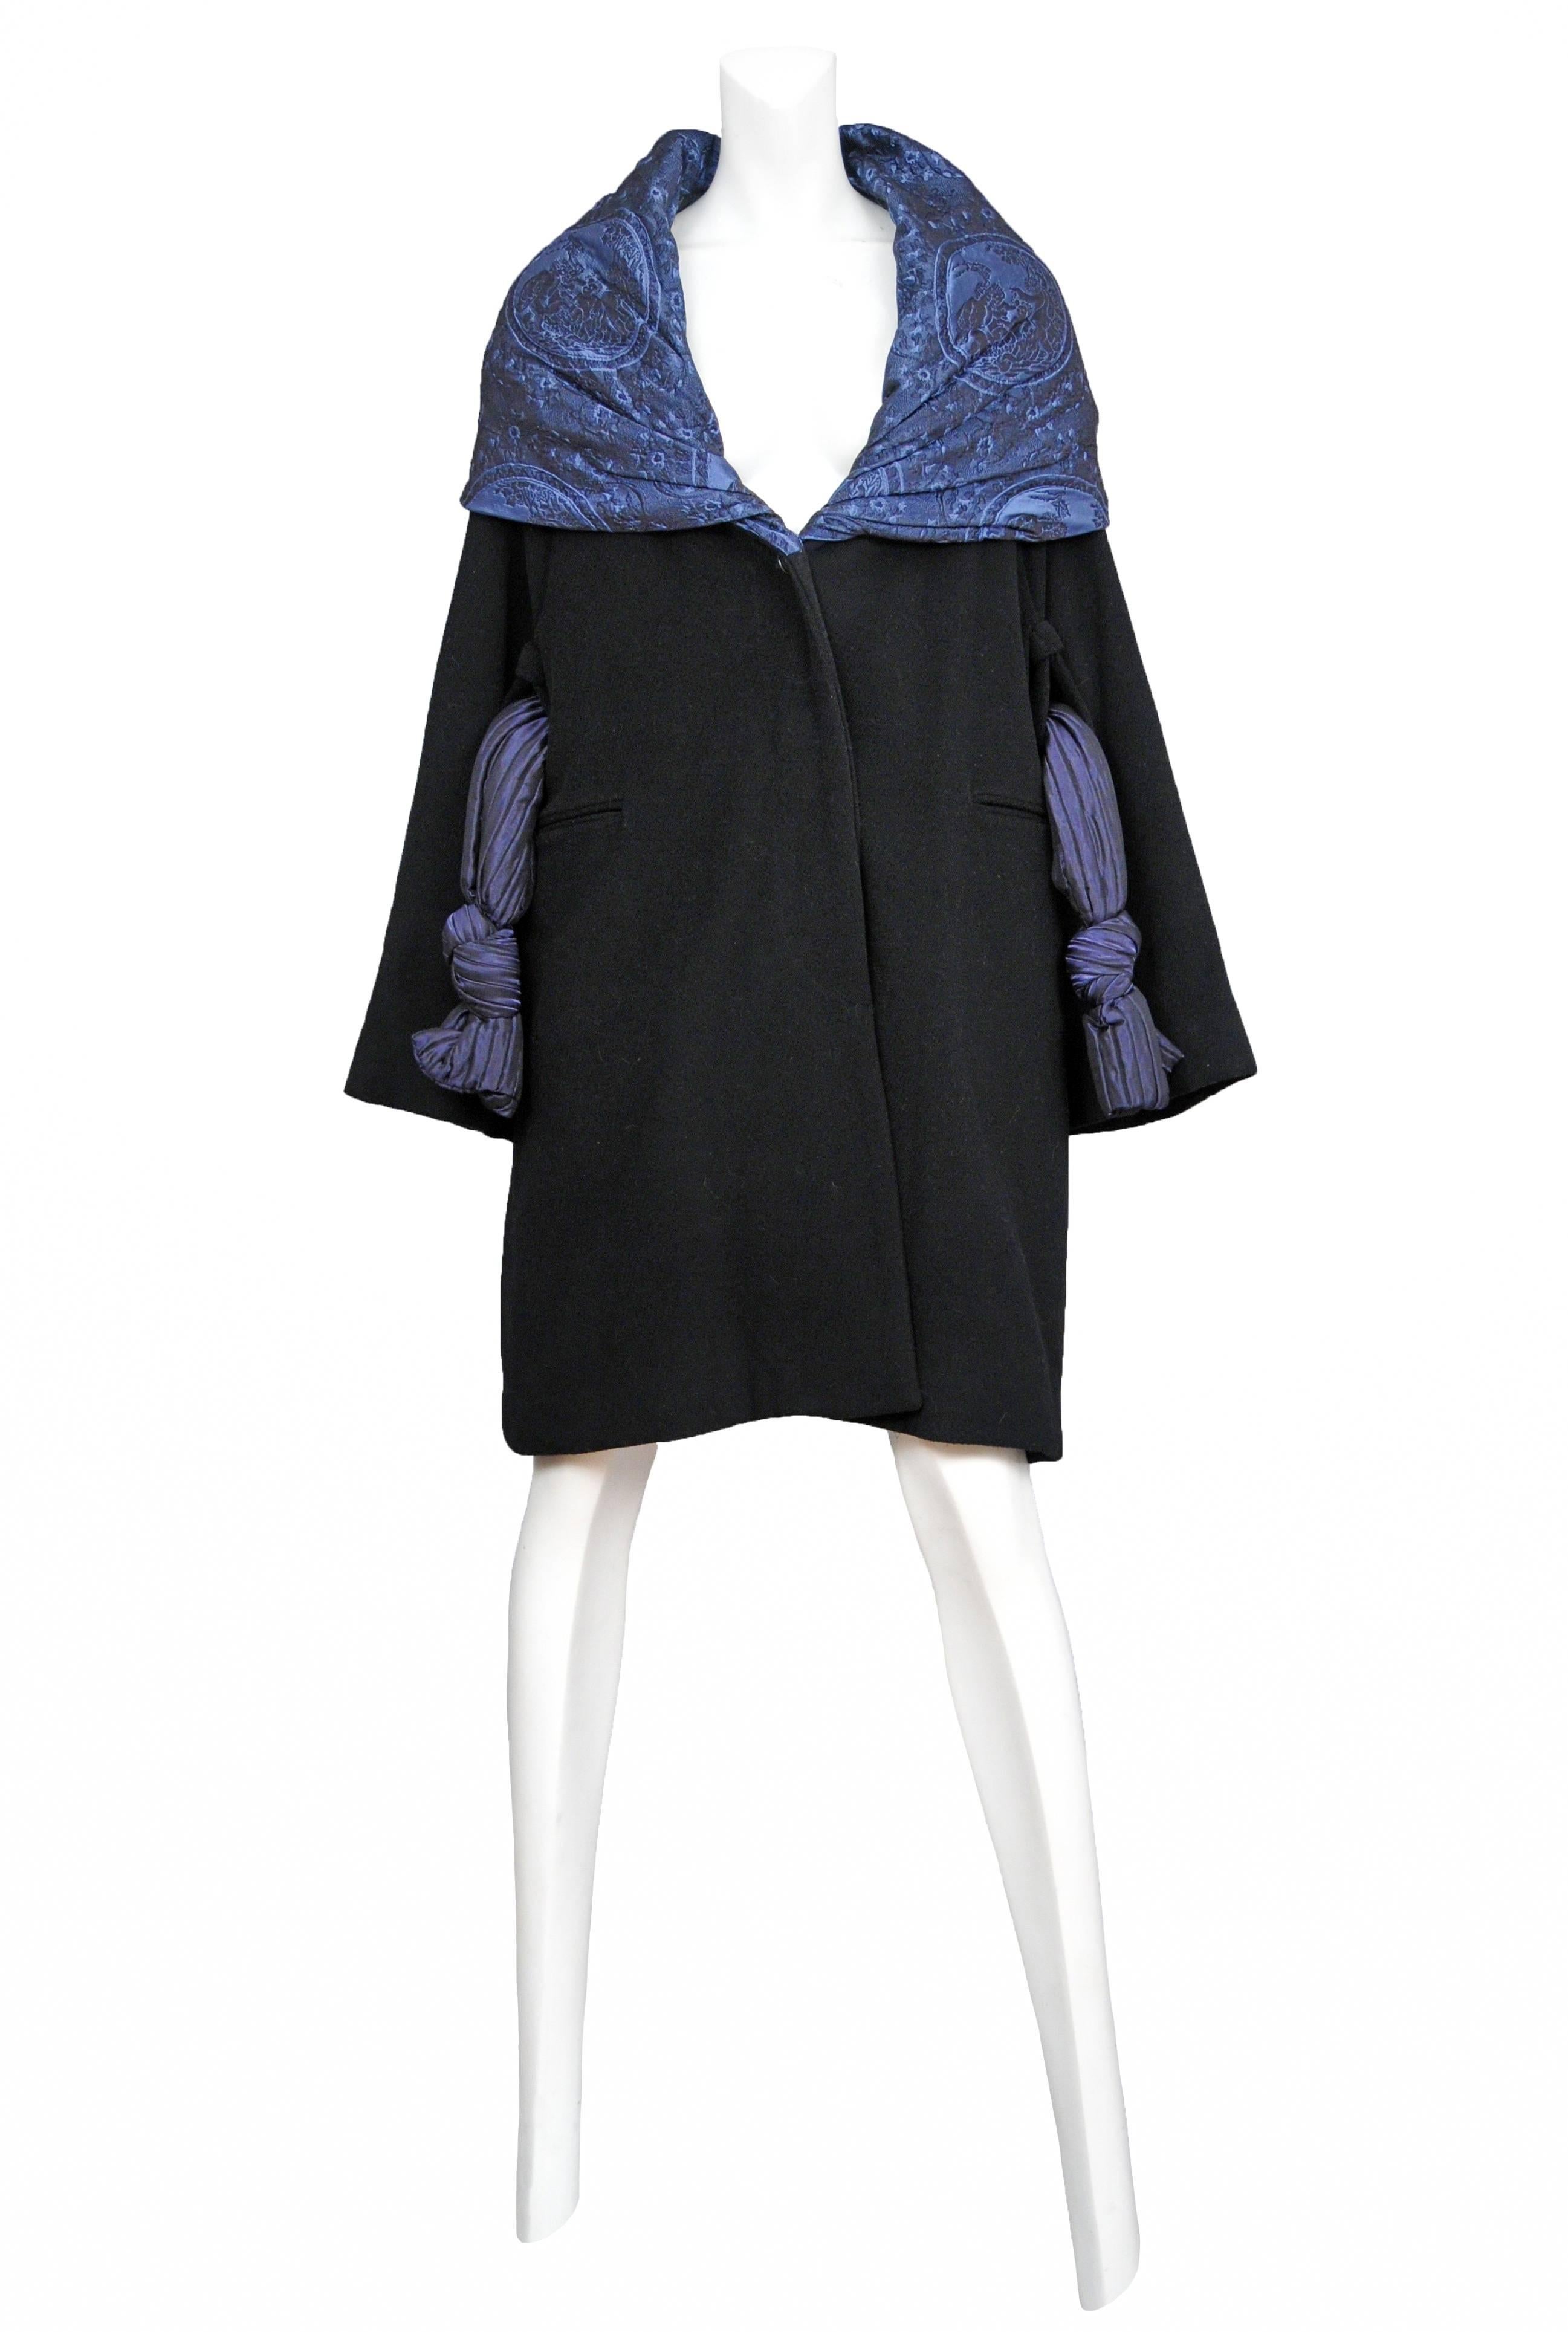 Vintage Romeo Gigli black wool knee length coat featuring a blue metallic embroidered shawl collar that fits over the shoulders, a metallic blue knotted belt that hangs freely on either side of the hips, and two side pockets.
Please inquire for